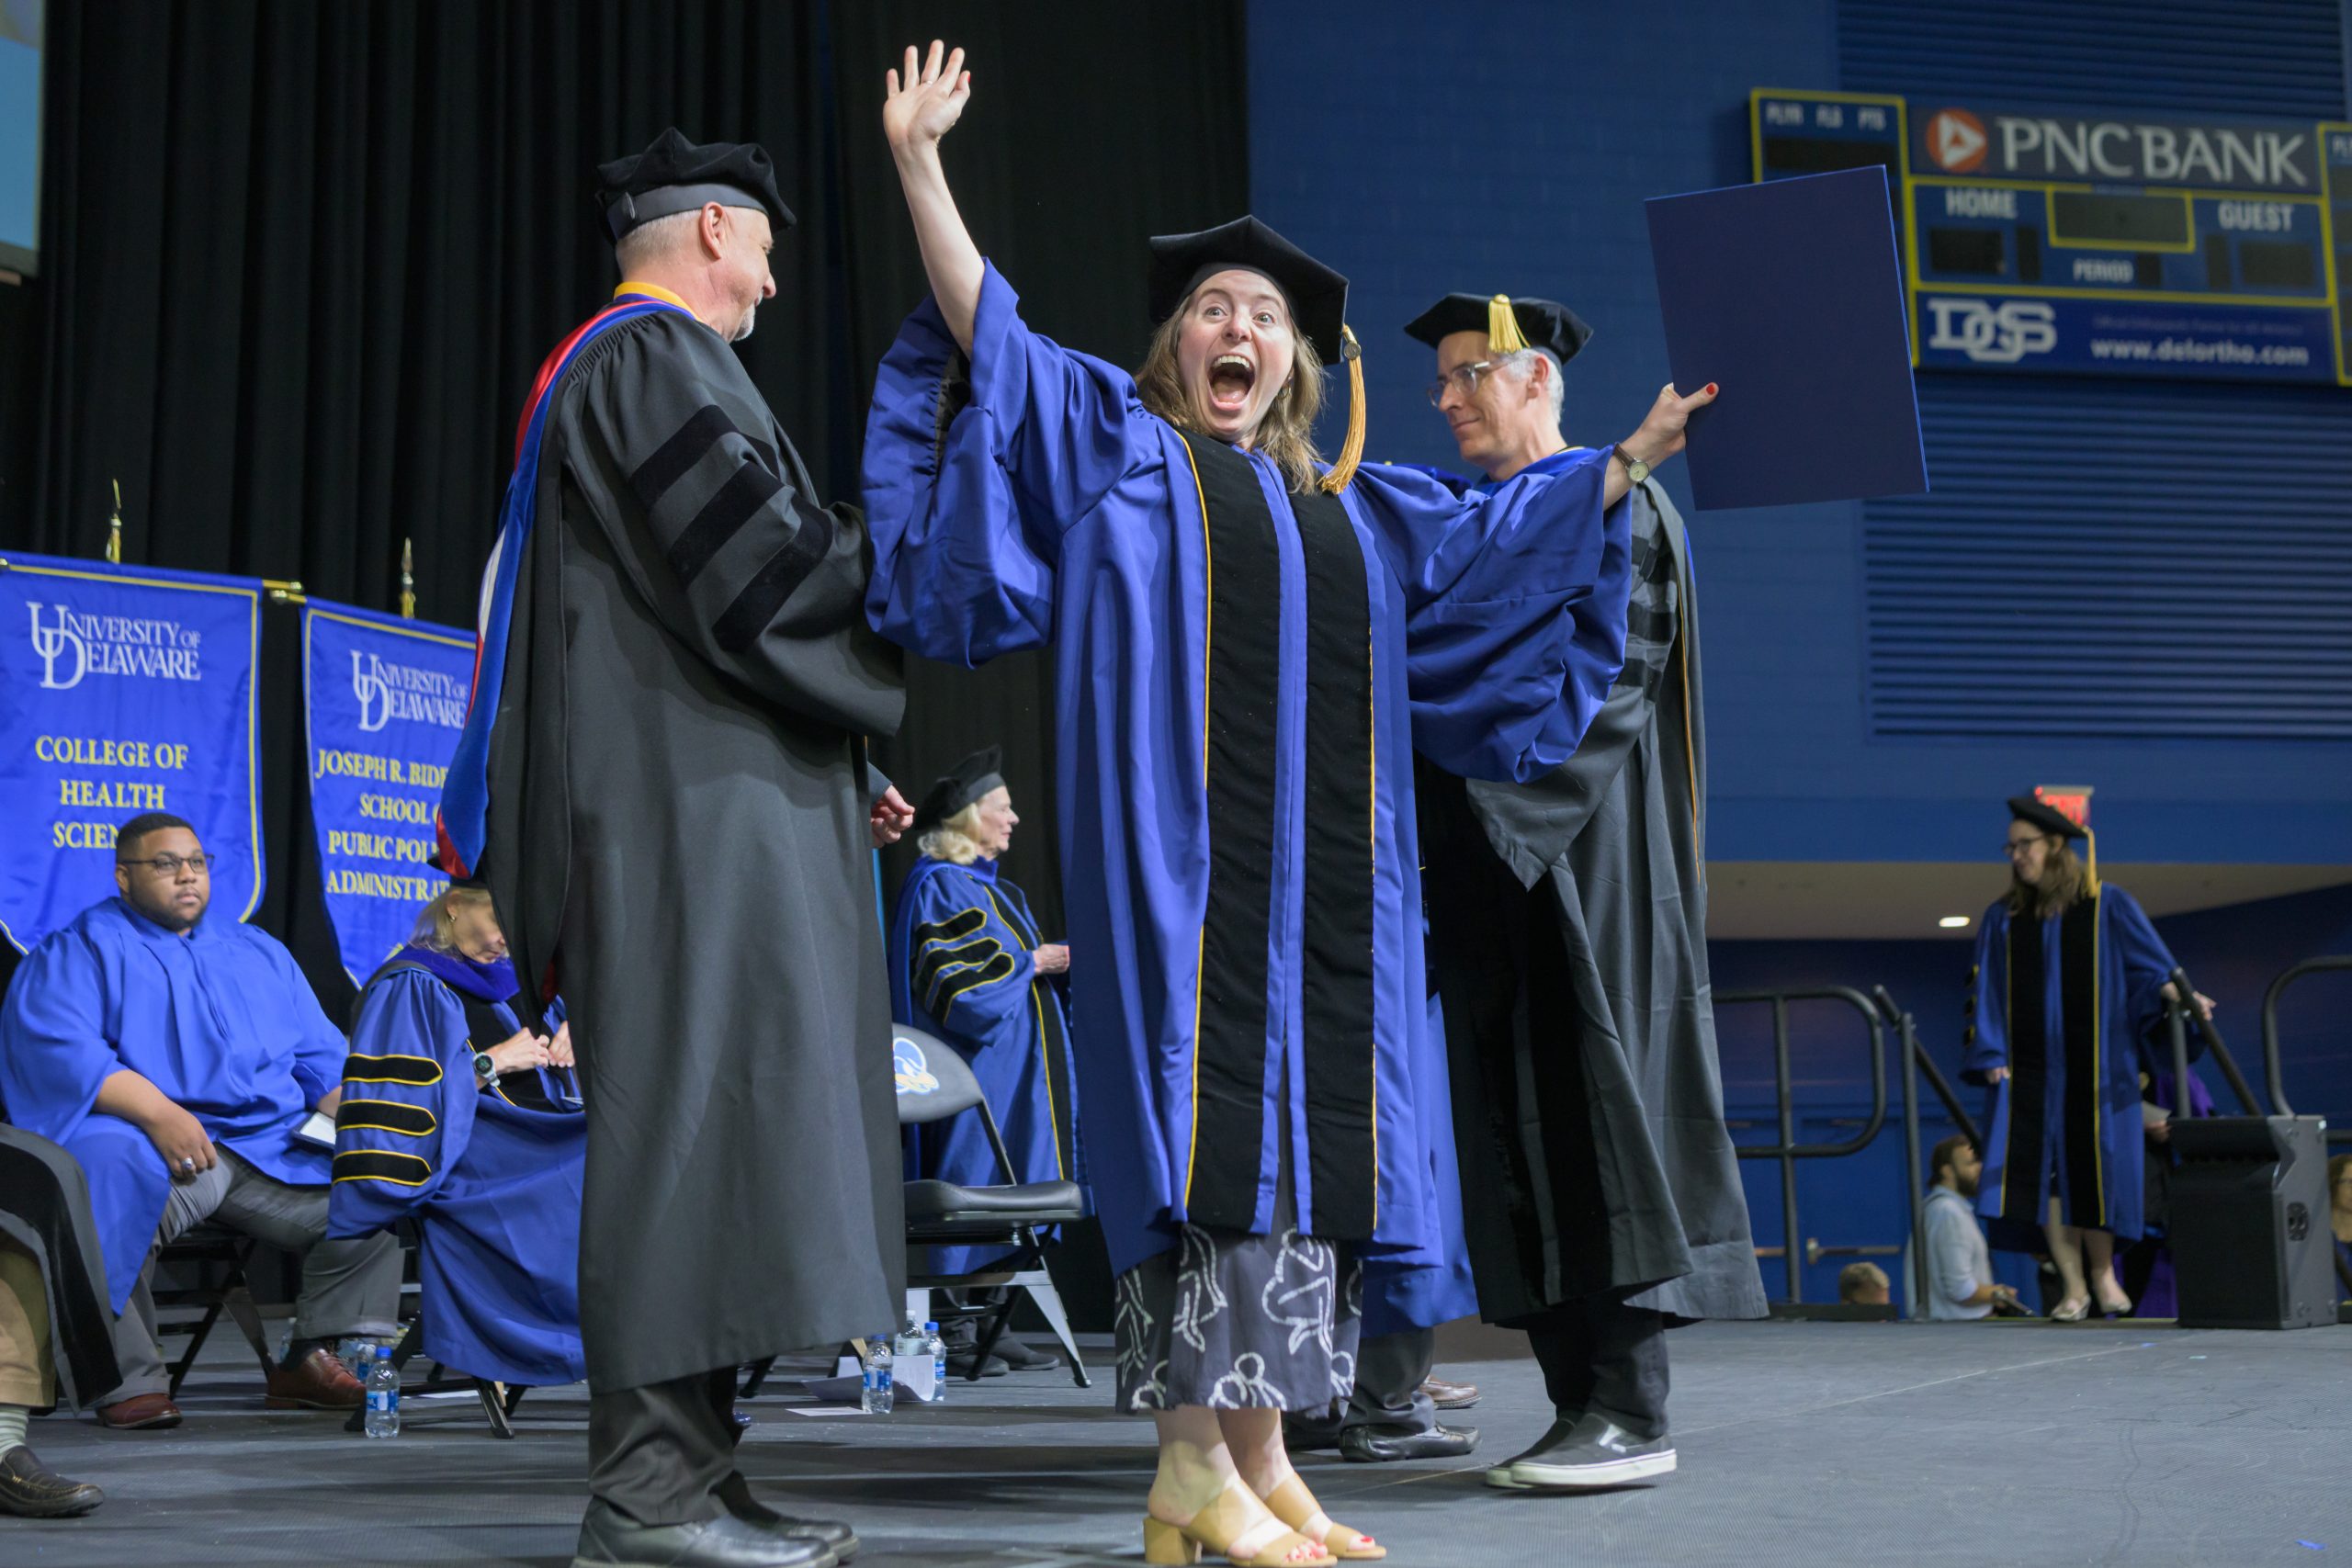 The 2023 University of Delaware Doctoral Hooding Ceremony was held on May 25 at the Bob Carpenter Center. The Hooding Ceremony recognizes students who have achieved the highest academic degree — the doctorate — it is often a moment of great joy.